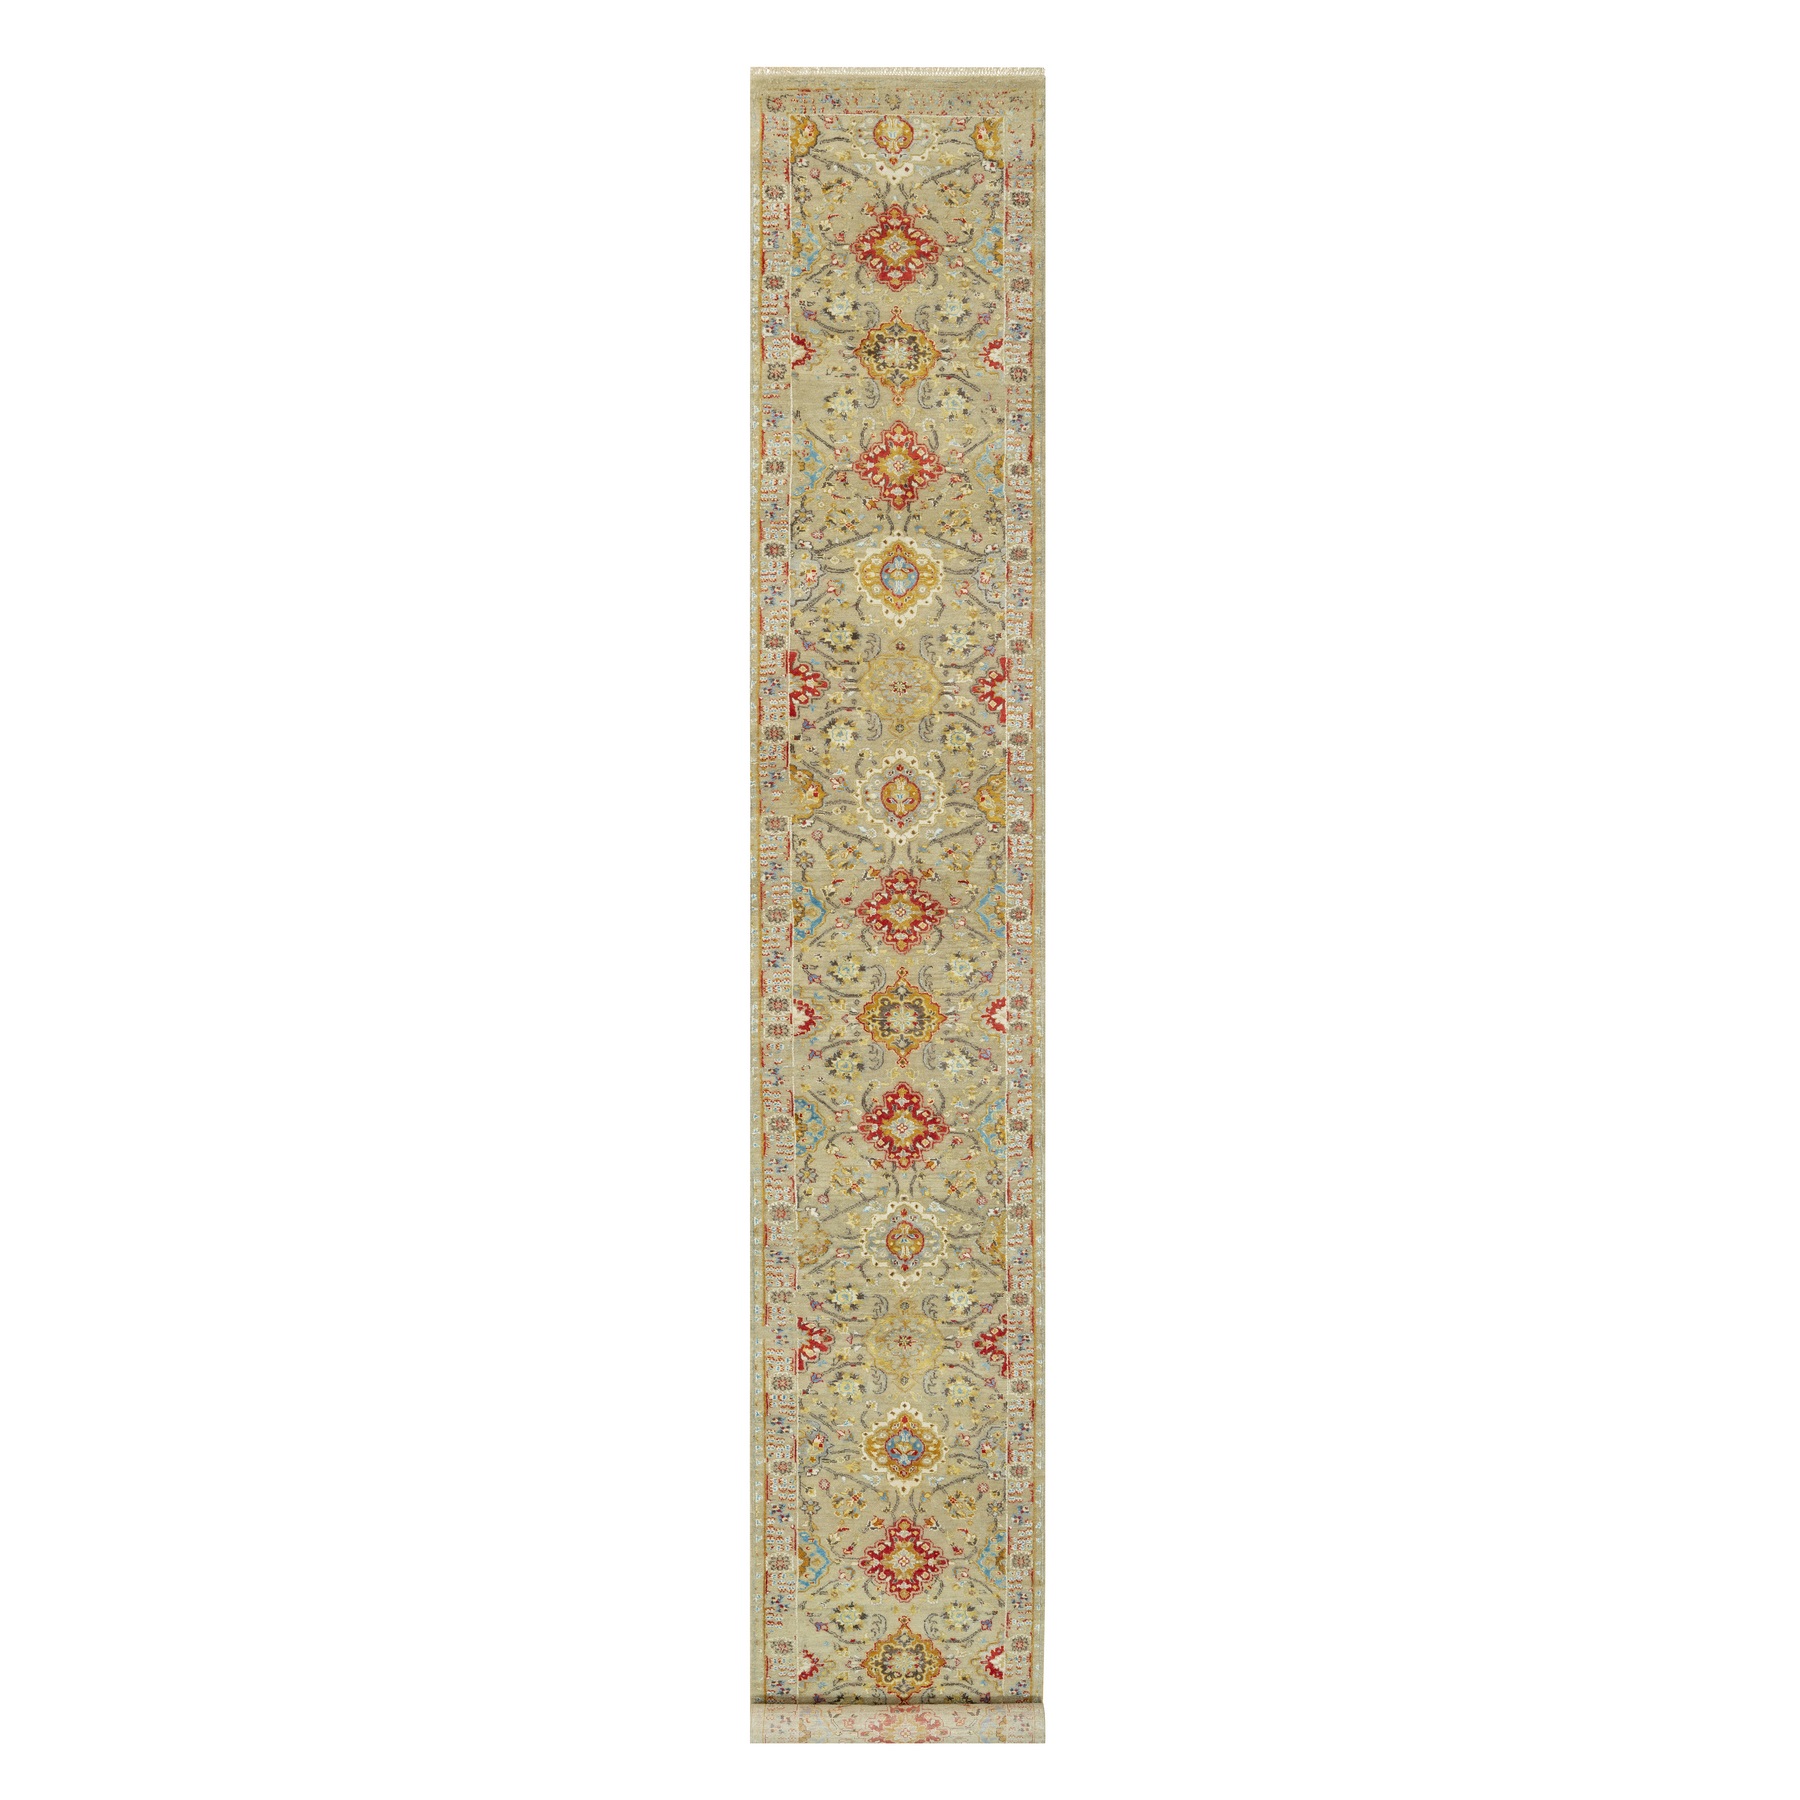  Silk Hand-Knotted Area Rug 2'9